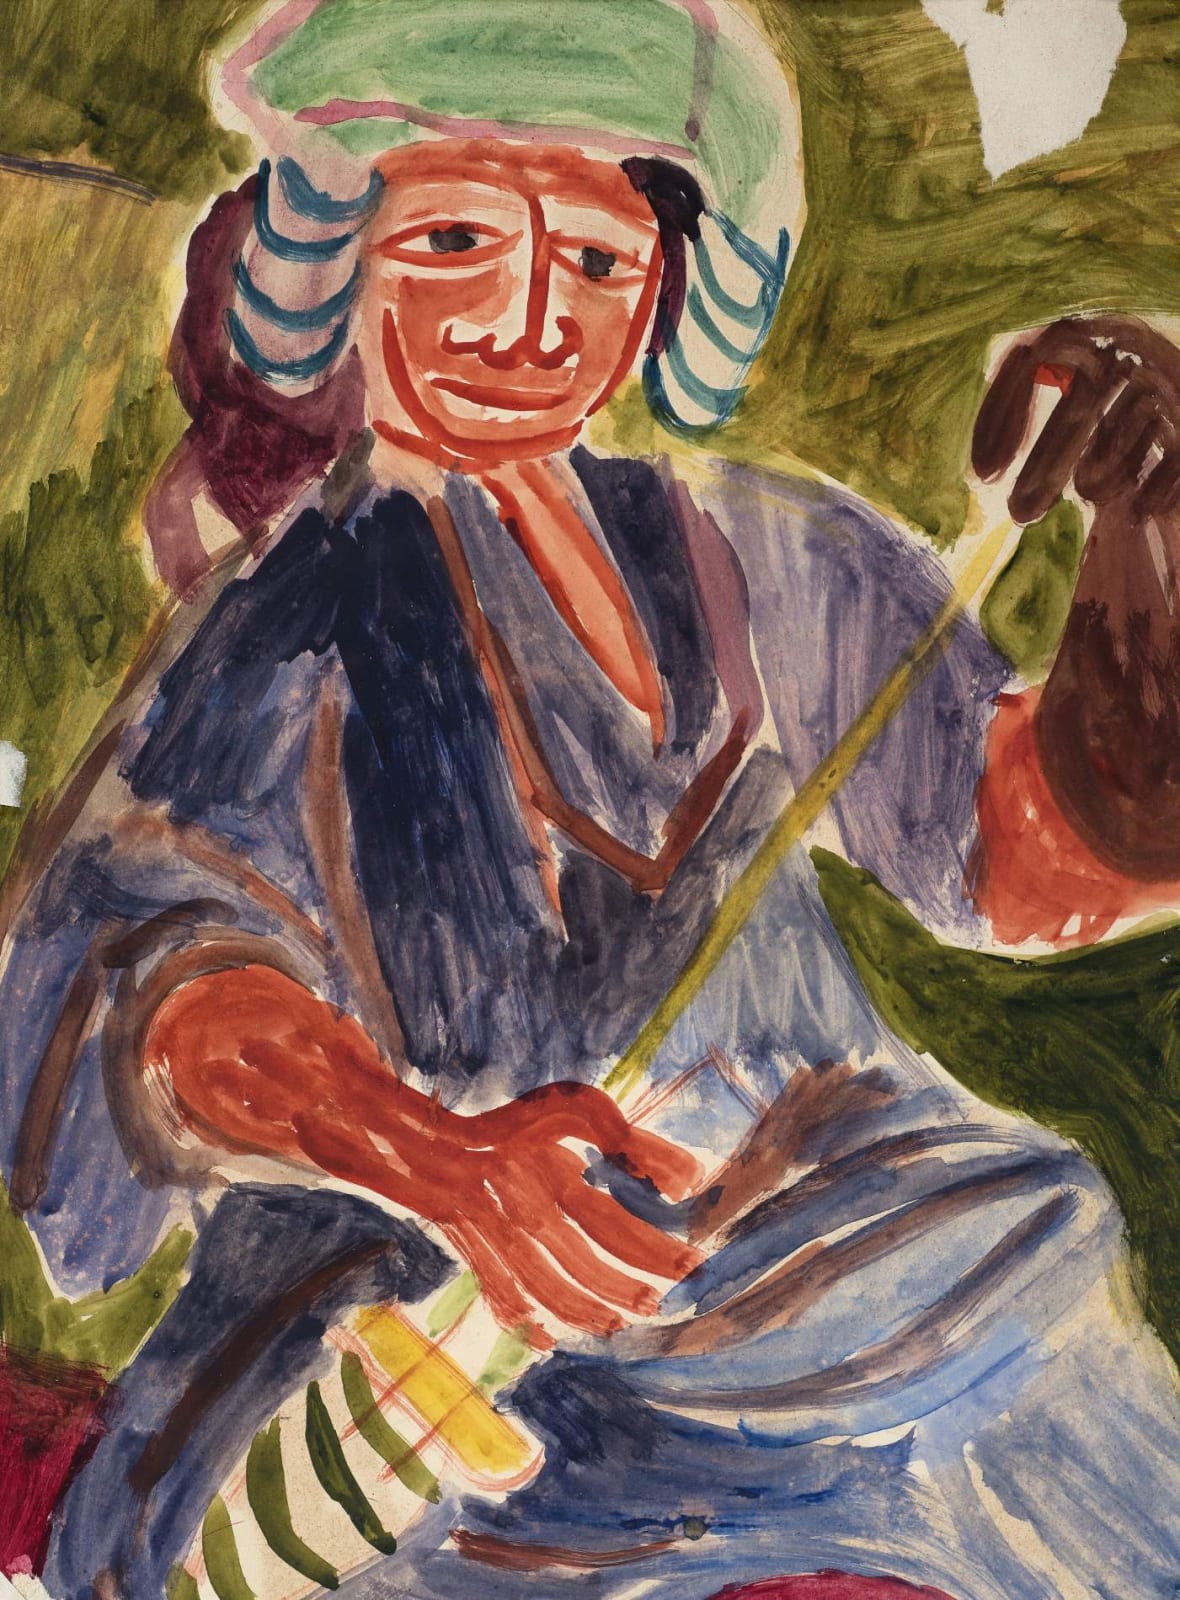 Janina Bogucka-Wolff (1908-1960s) Portrait of a Woman verso Gipsy n.d. Watercolour on paper 32.5 x 25.5 cm POSK Art Collection, London